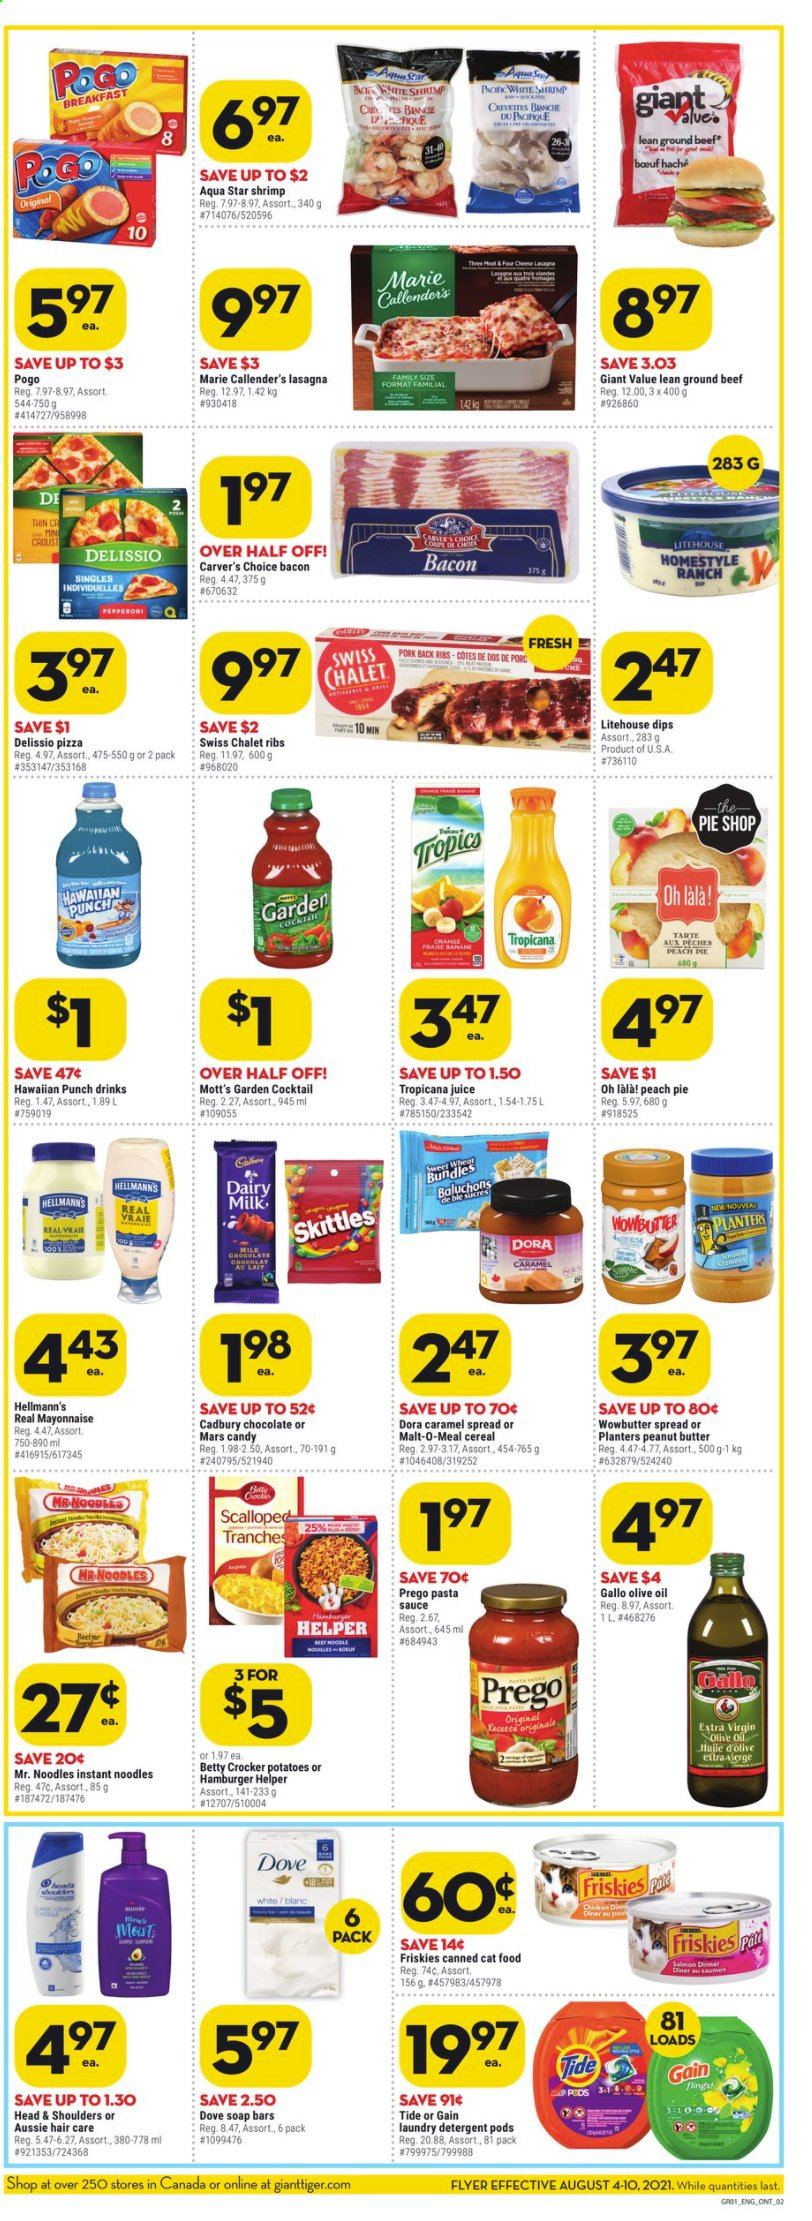 thumbnail - Giant Tiger Flyer - August 04, 2021 - August 10, 2021 - Sales products - pie, potatoes, Mott's, shrimps, pizza, pasta sauce, instant noodles, sauce, noodles, lasagna meal, Marie Callender's, bacon, pepperoni, mayonnaise, Hellmann’s, chocolate, Mars, Cadbury, Dairy Milk, Skittles, malt, cereals, caramel, olive oil, oil, peanut butter, Planters, juice, beef meat, ground beef, pork meat, pork ribs, pork back ribs, Gain, Tide, laundry detergent, soap, Aussie, animal food, cat food, Friskies, Head & Shoulders. Page 3.